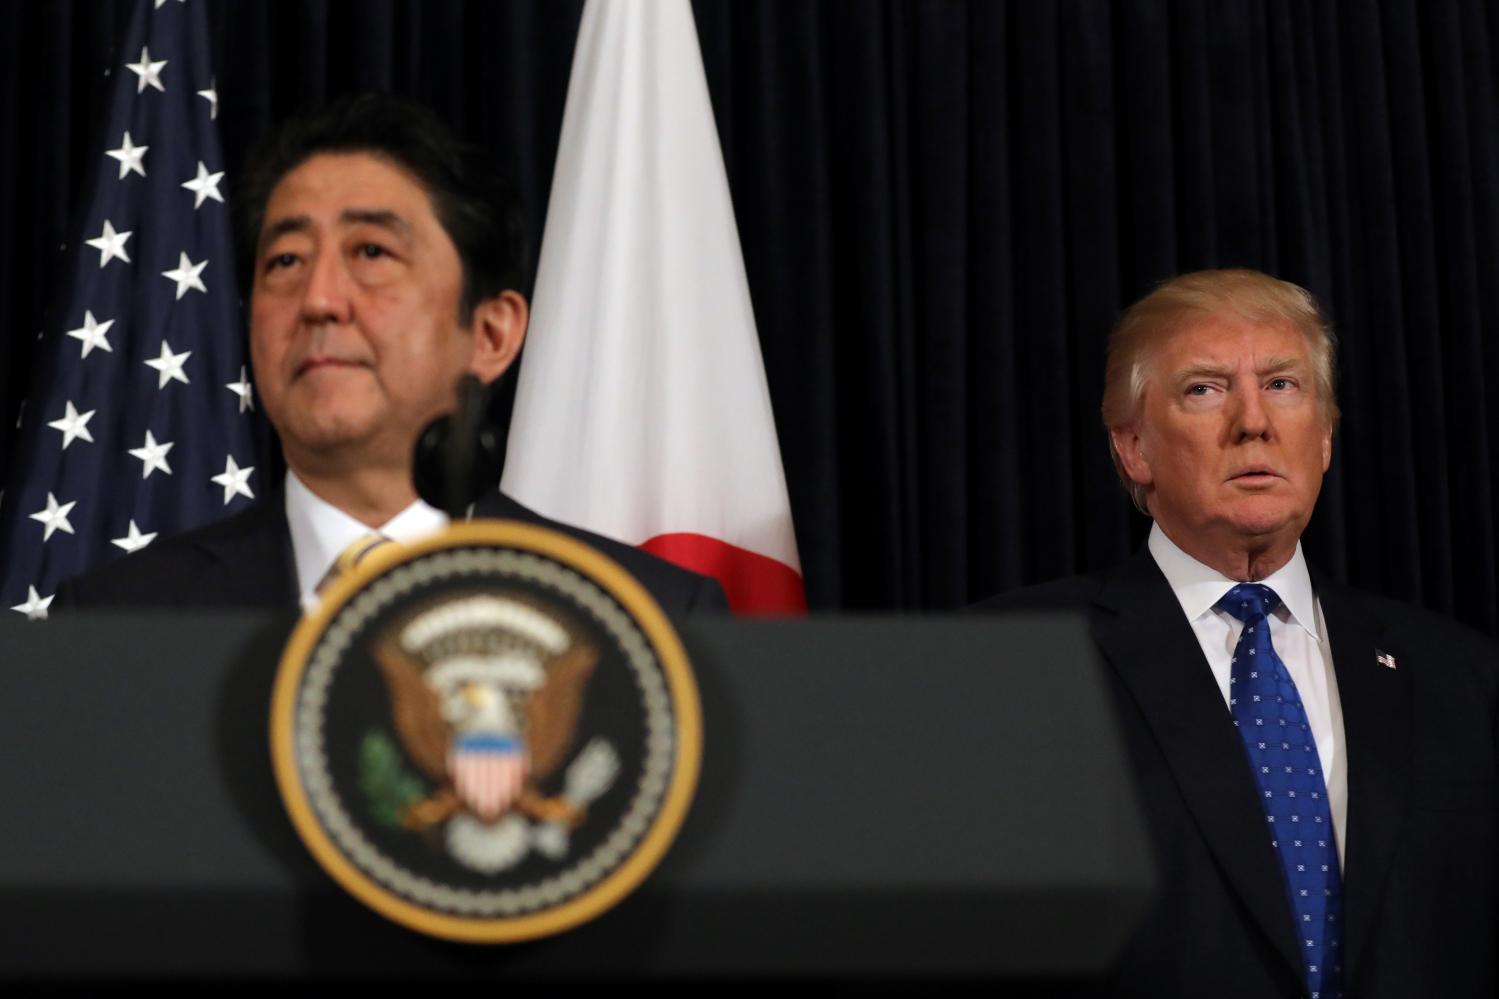 President Trump and PM Abe standing together